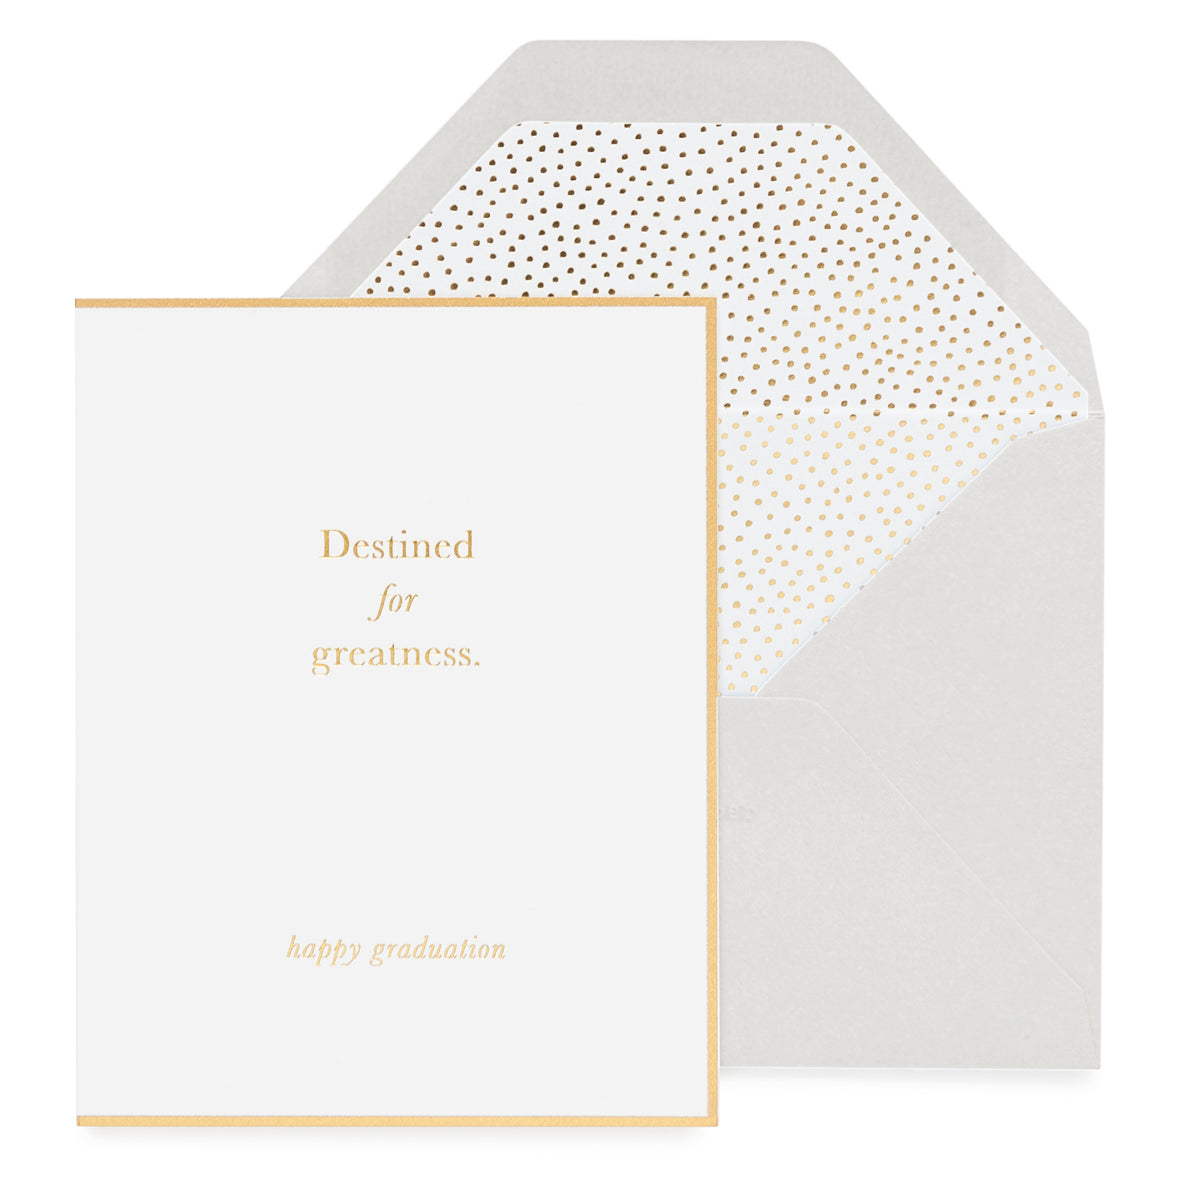 Gold foil destined for greatness card with a grey envelope